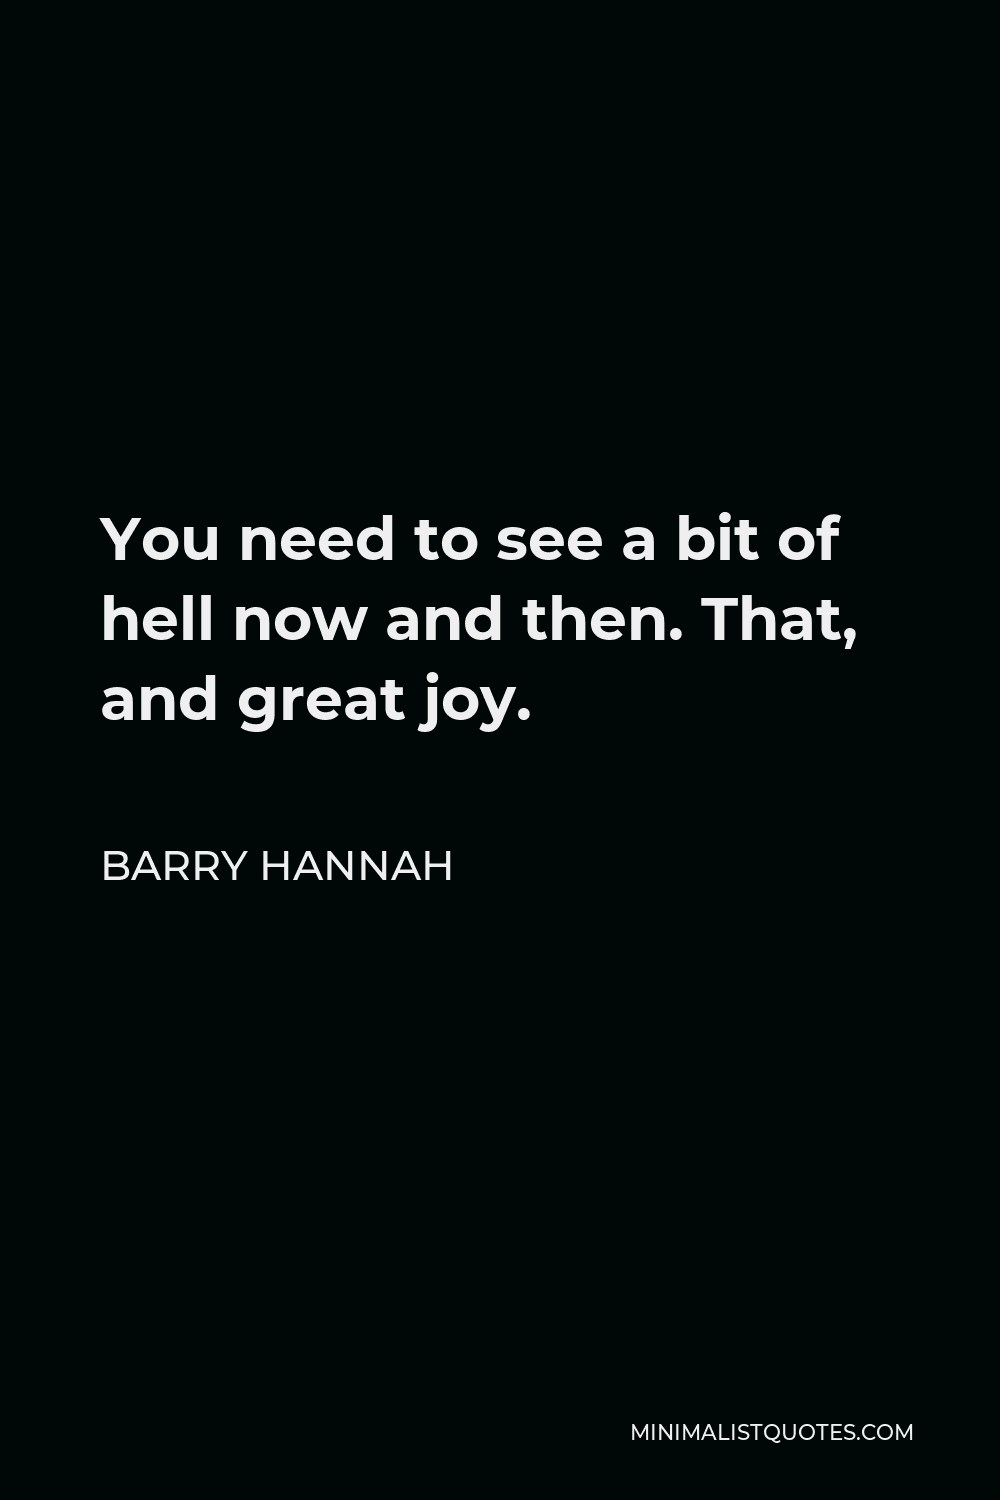 Barry Hannah Quote - You need to see a bit of hell now and then. That, and great joy.